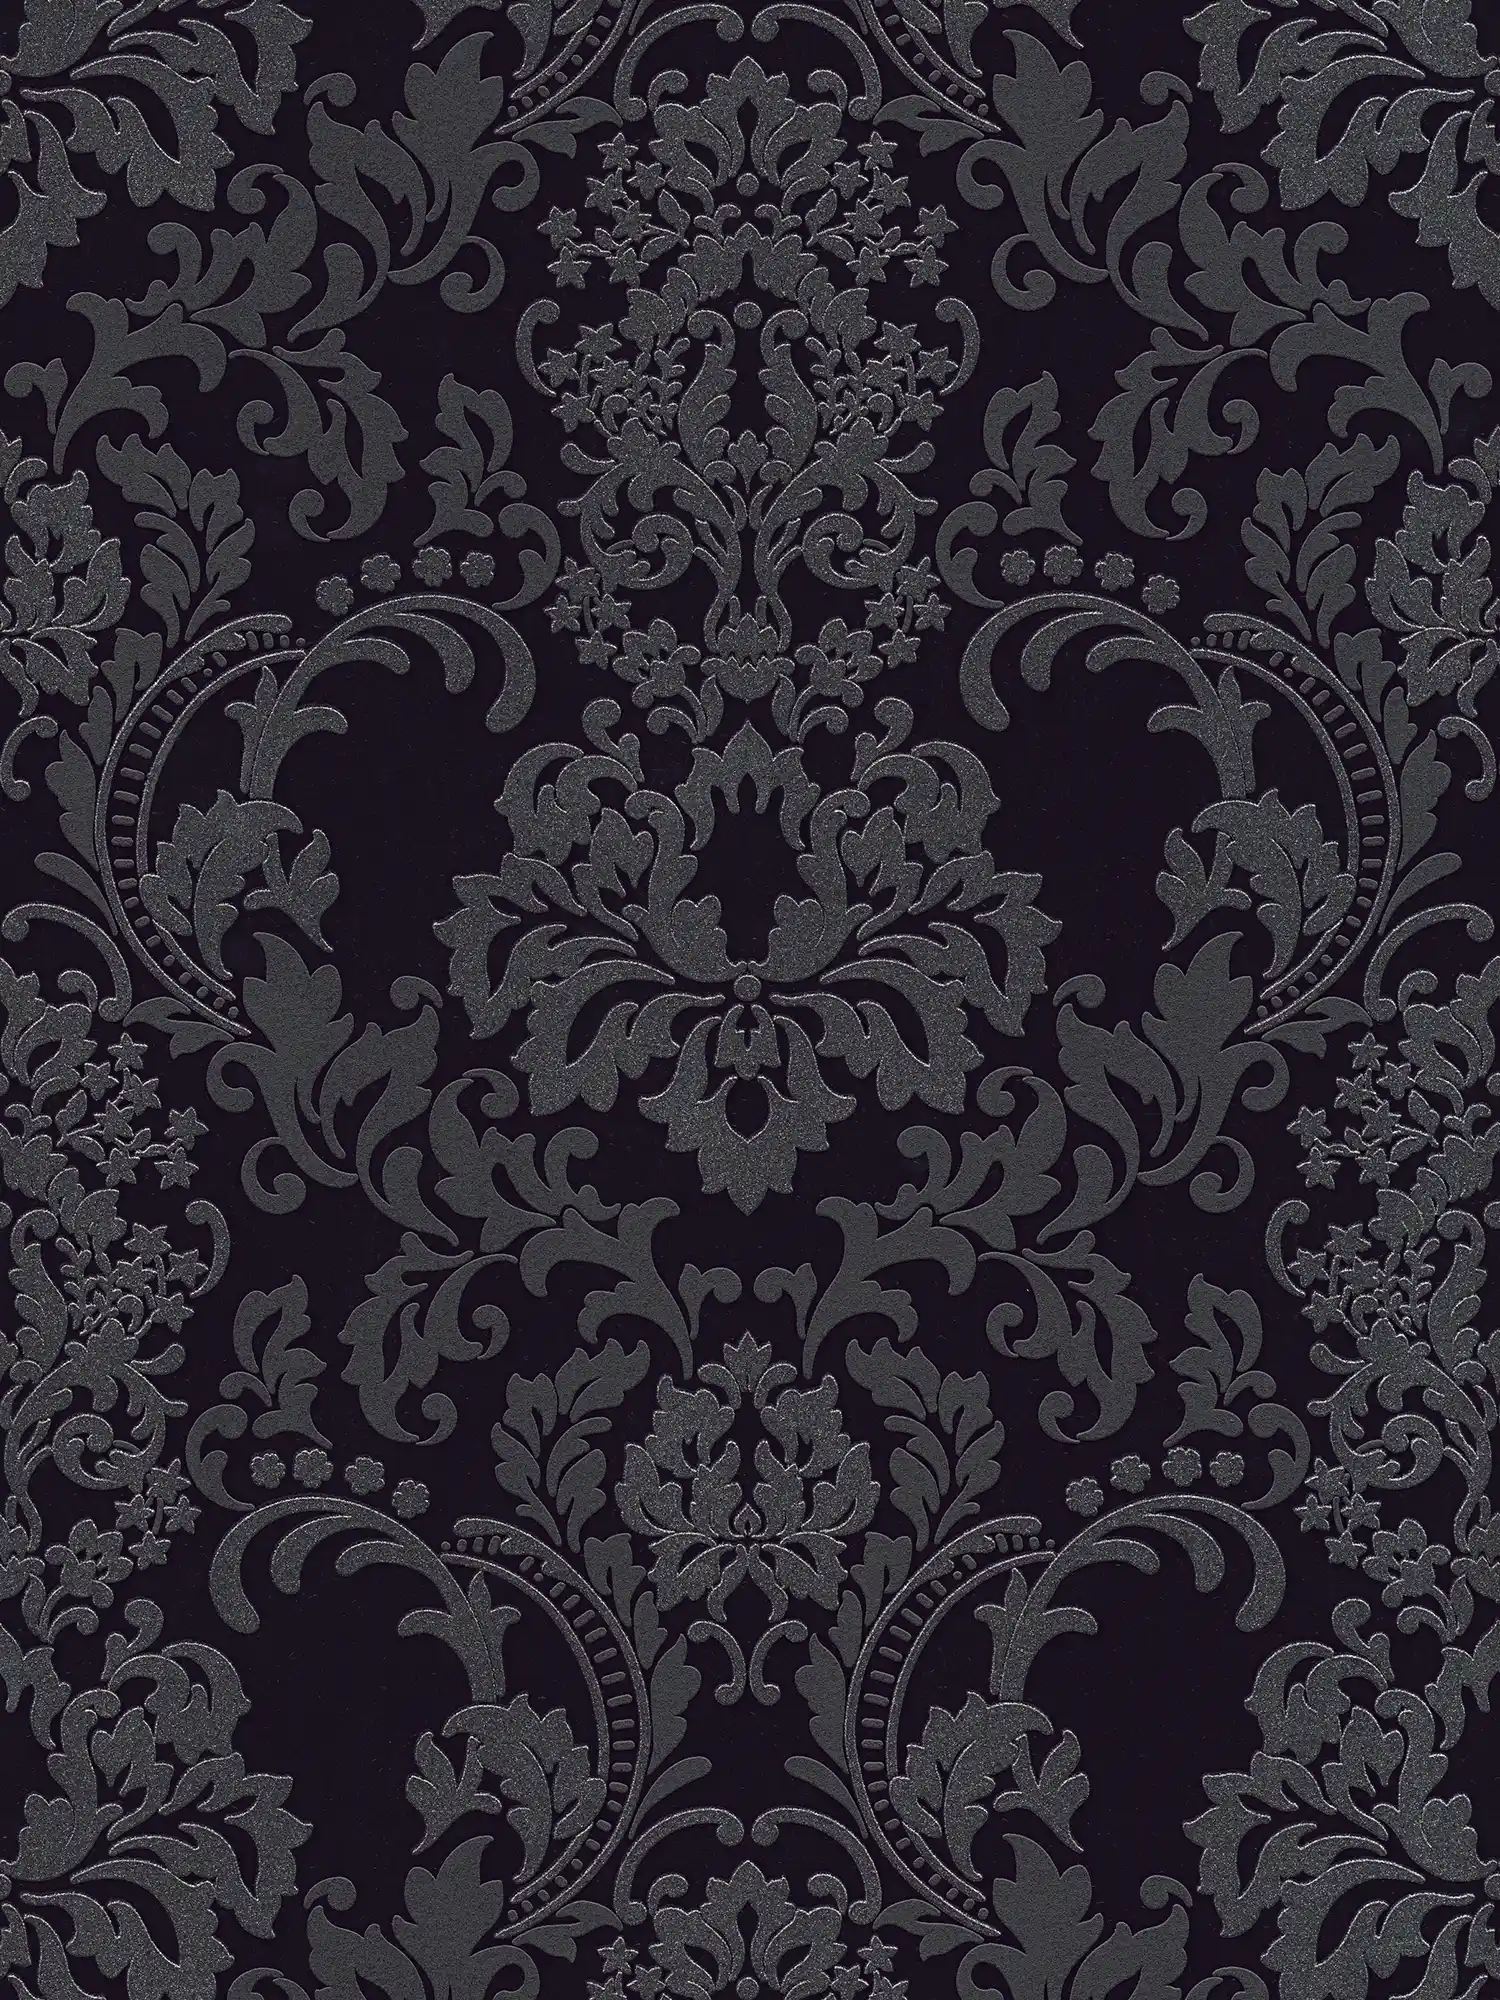         Baroque wallpaper with glitter effect - black
    